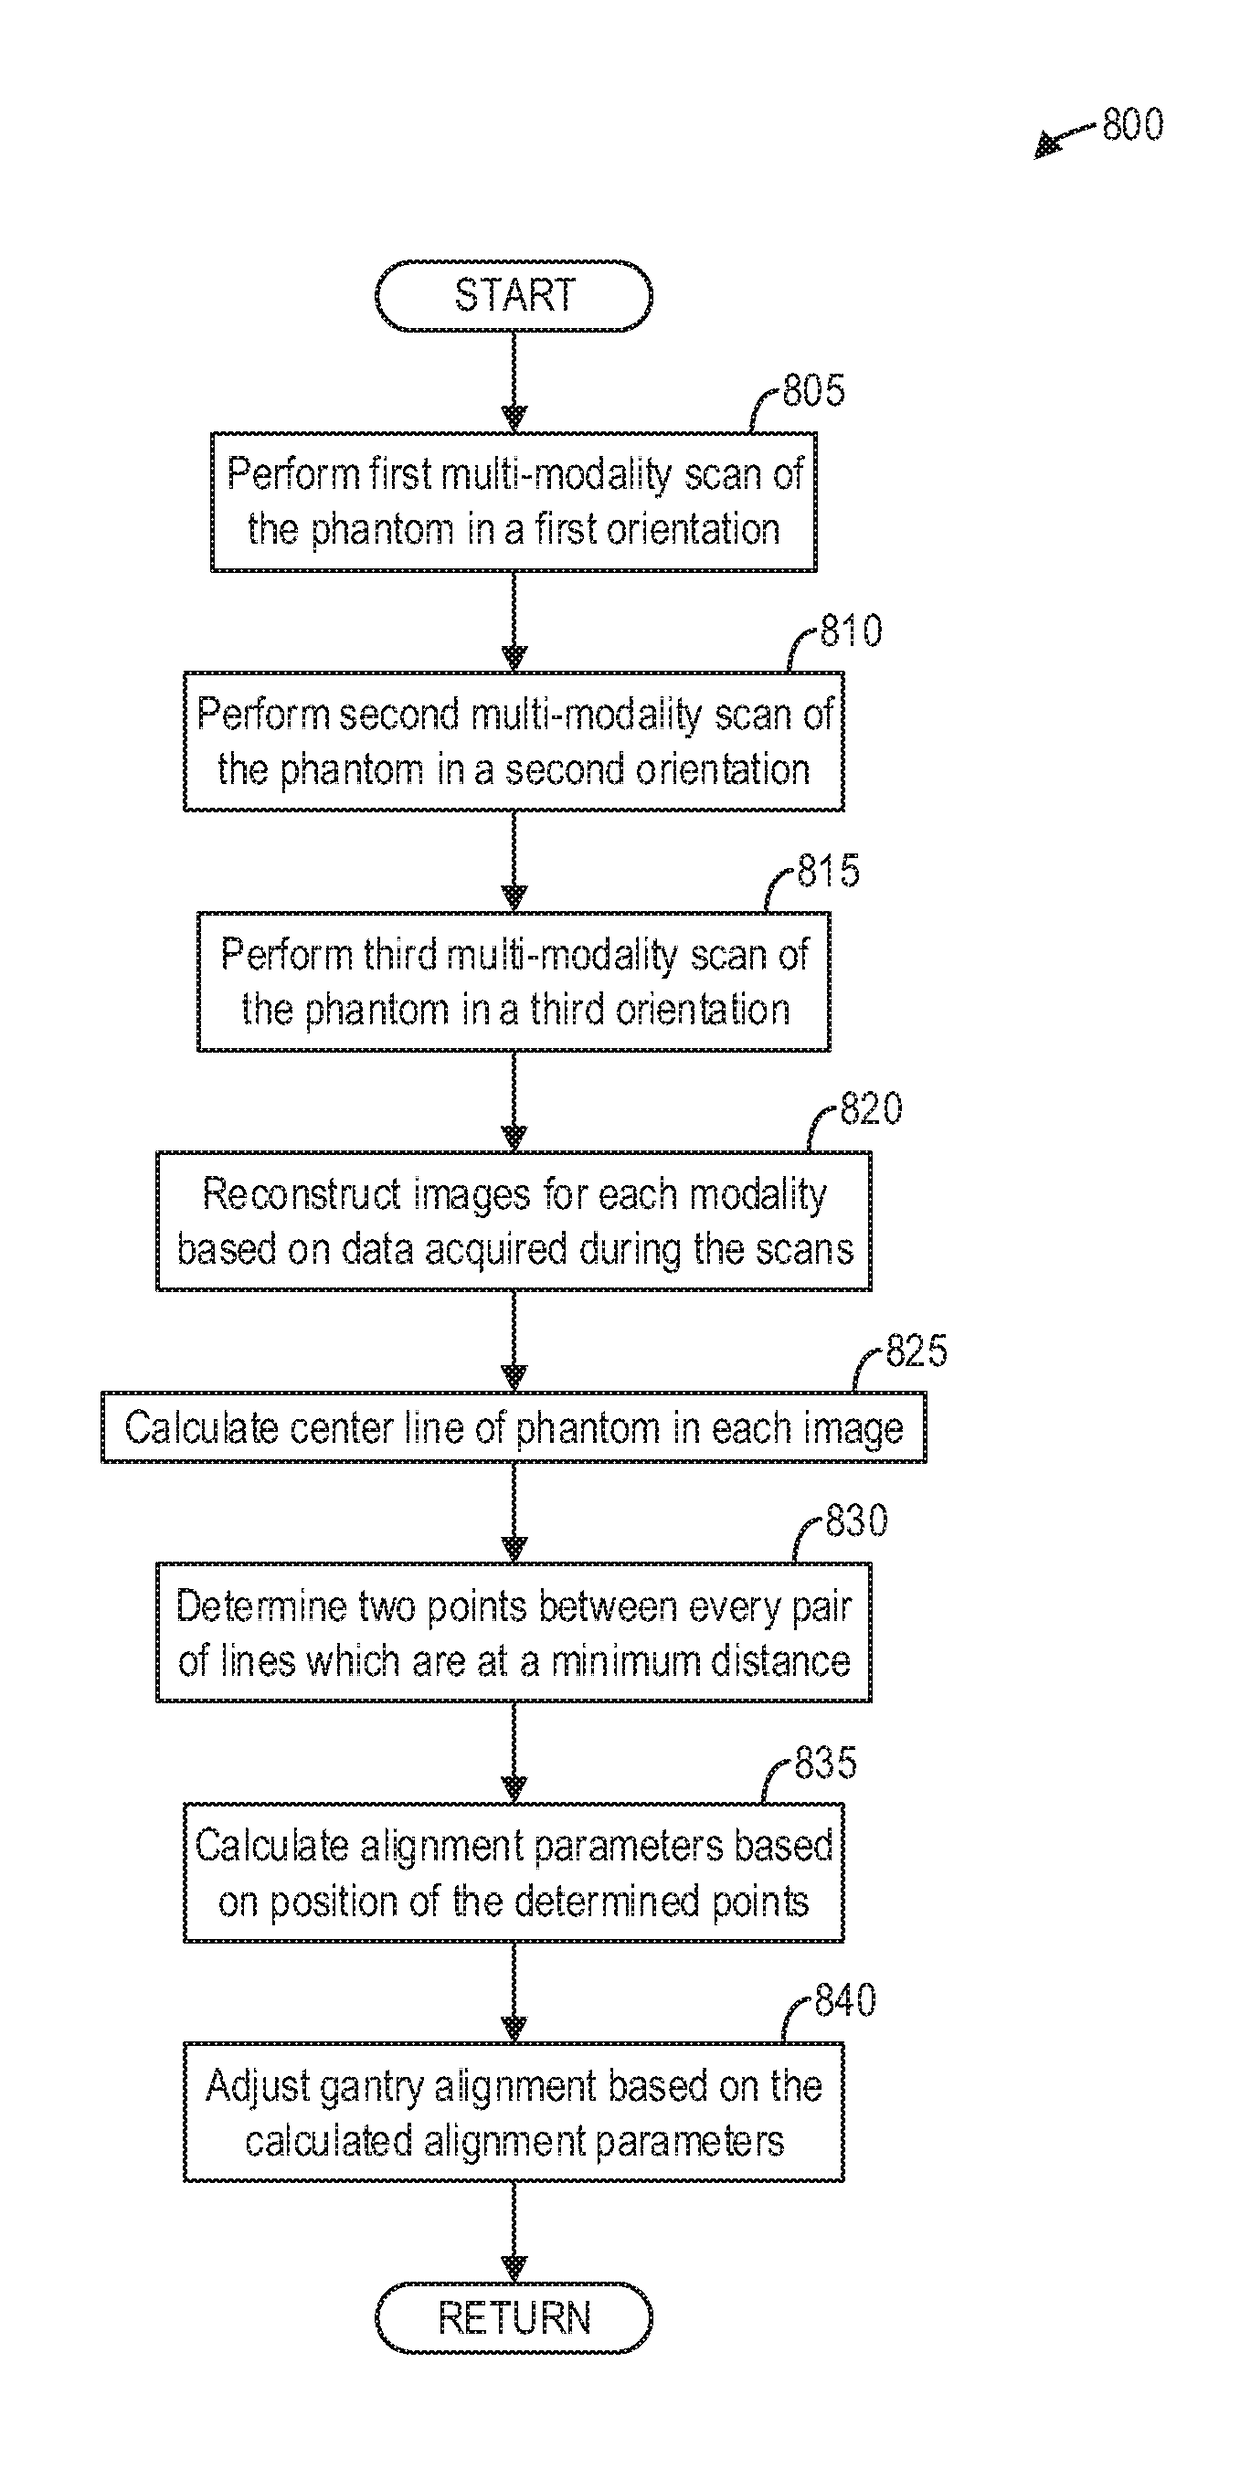 Systems and methods for multi-modality imaging component alignment